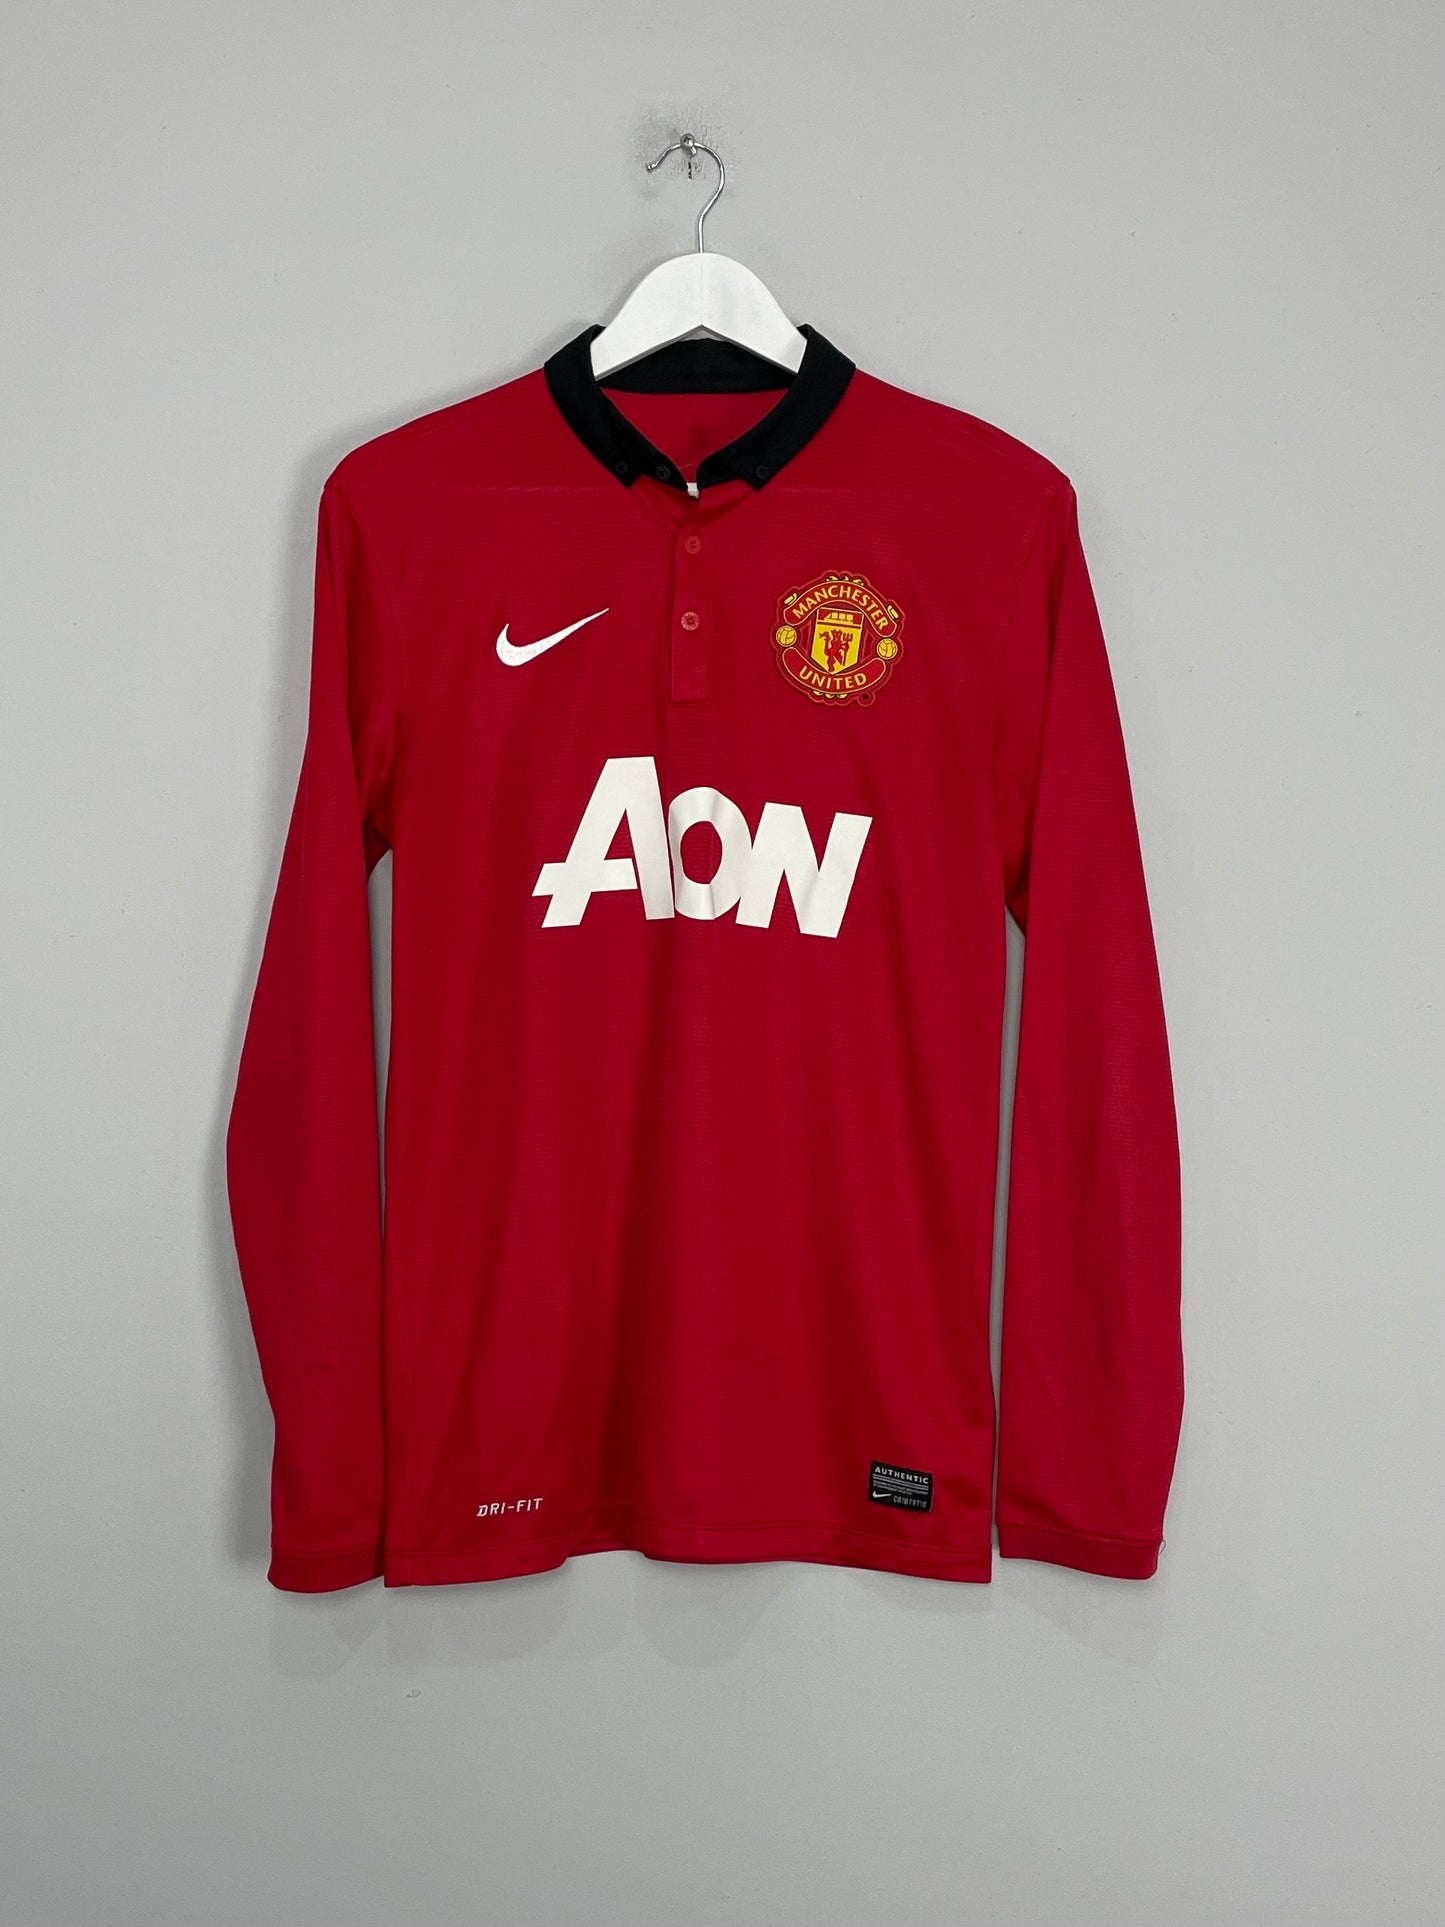 2013/14 MANCHESTER UNITED ROONEY #10 L/S HOME SHIRT (S) NIKE